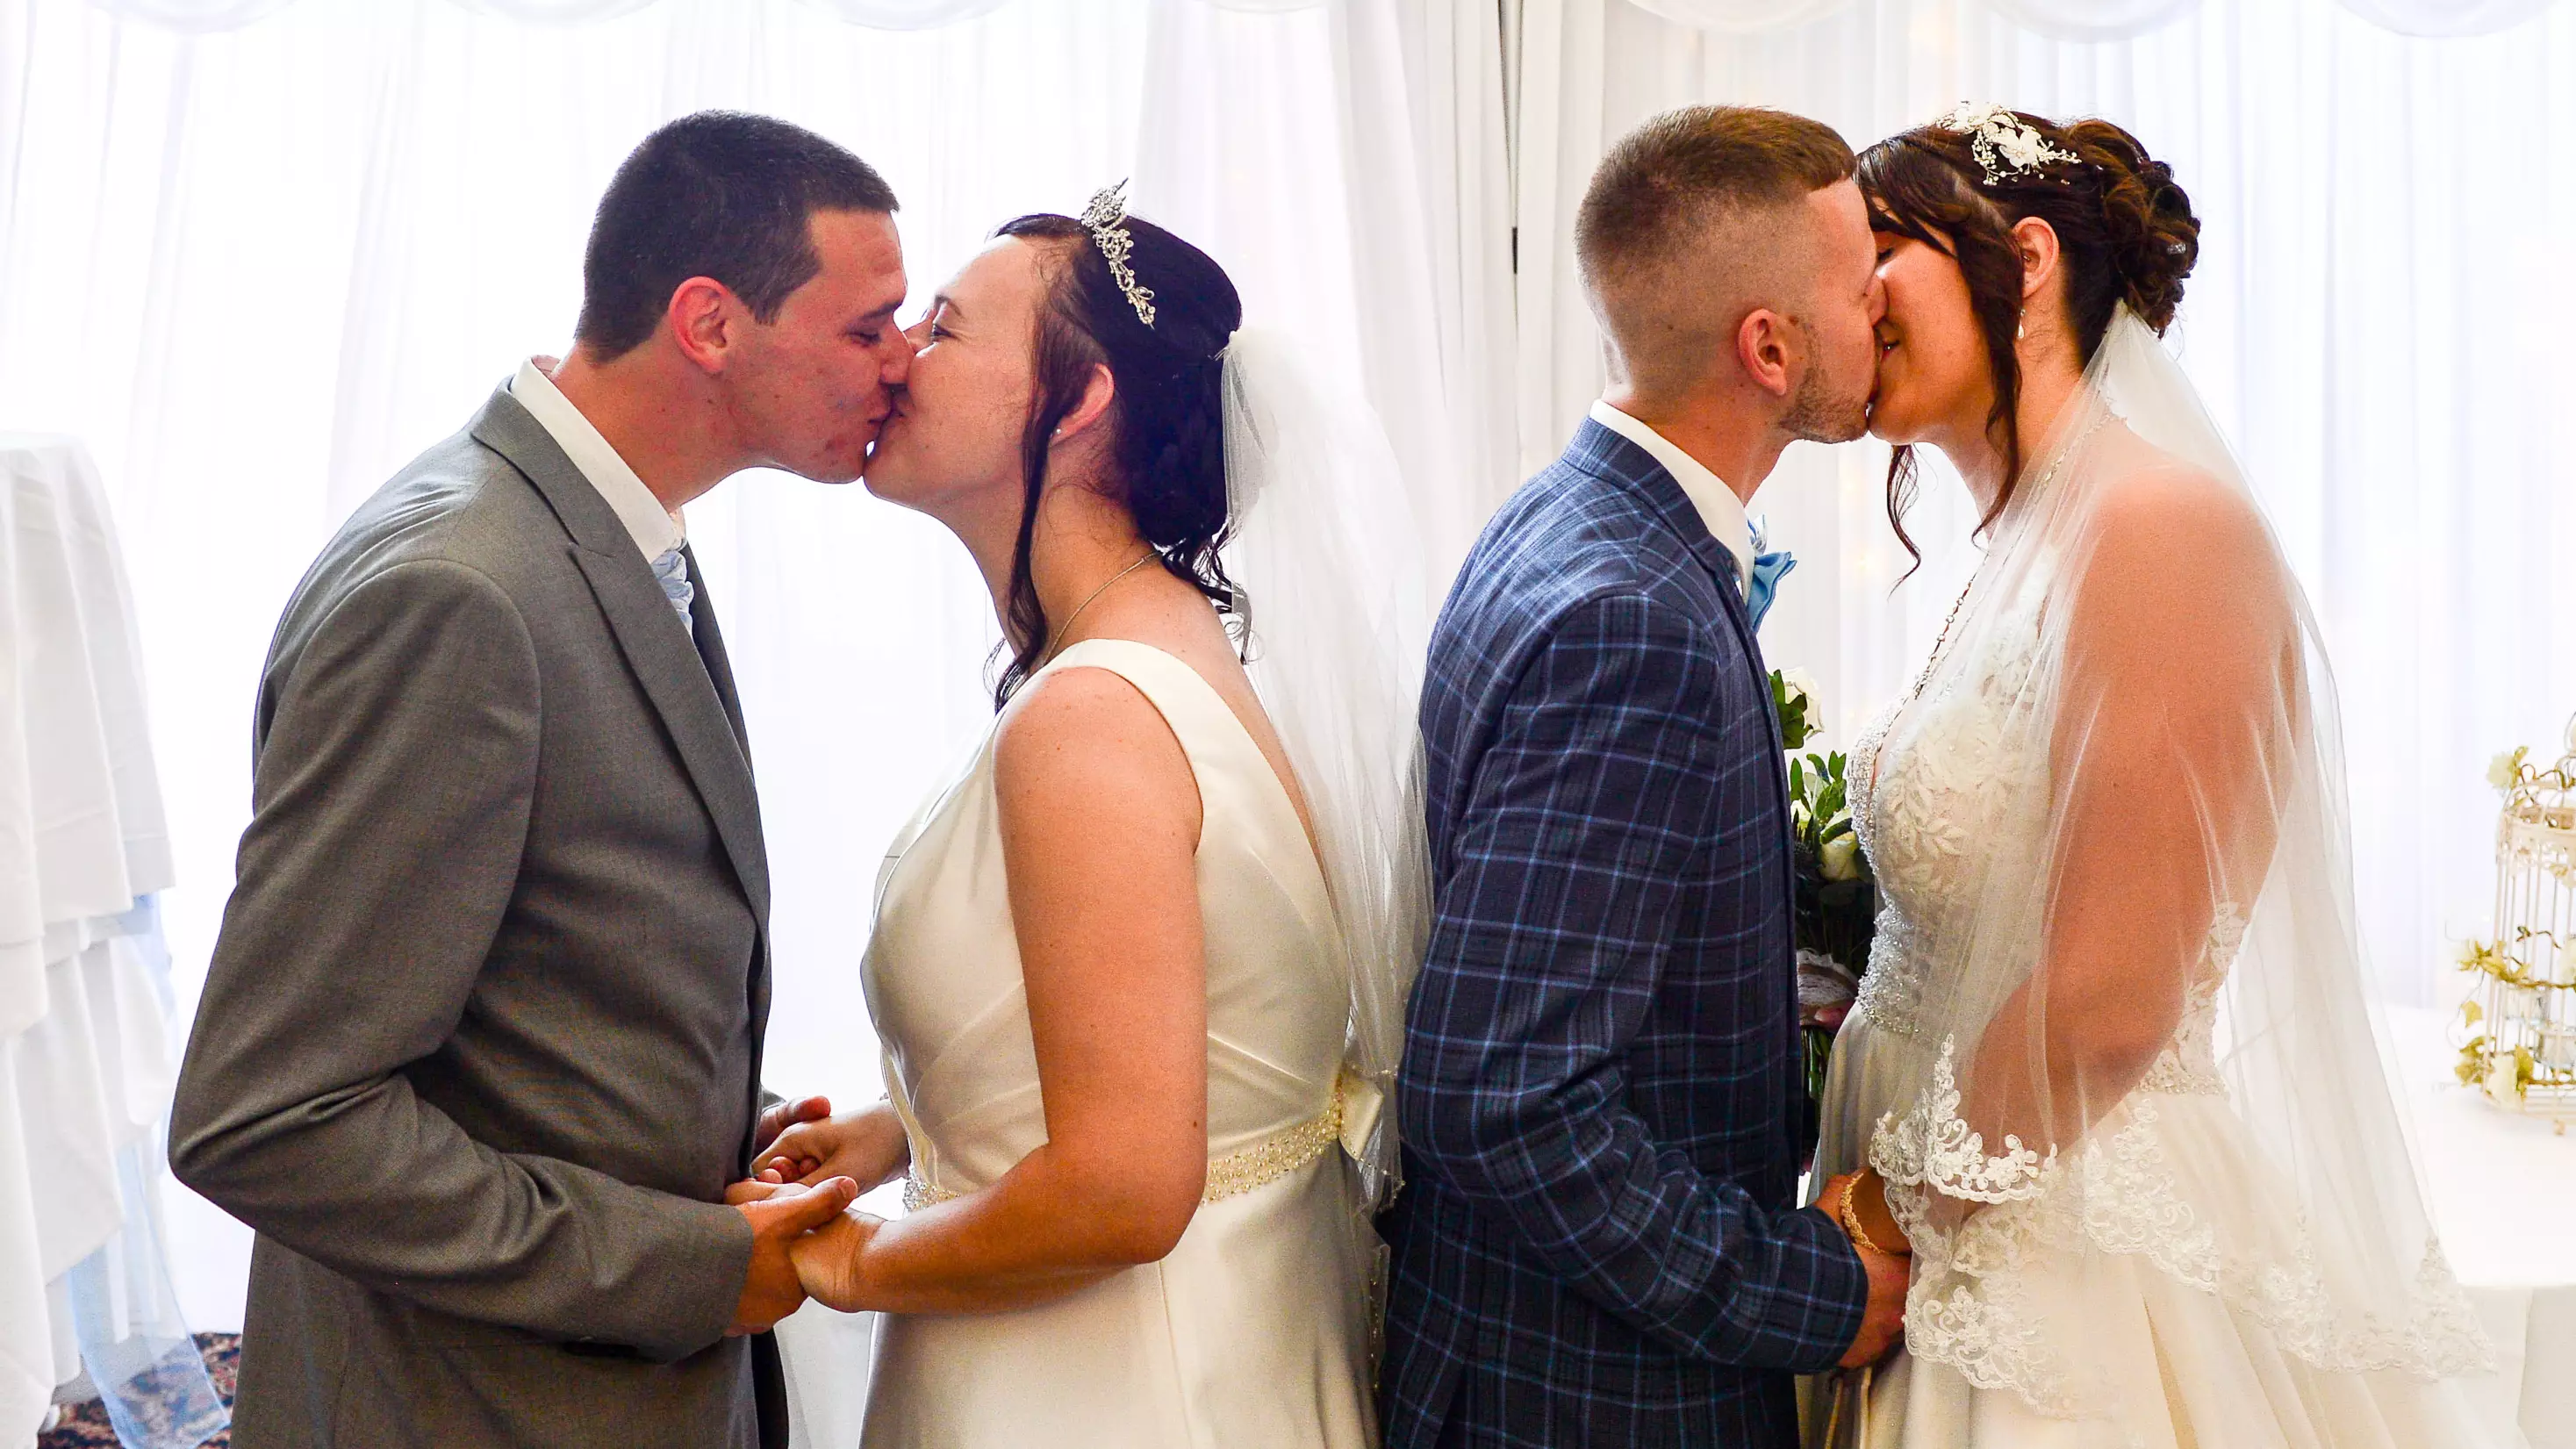 Thrifty Brother And Sister Share Wedding Day To Save Money